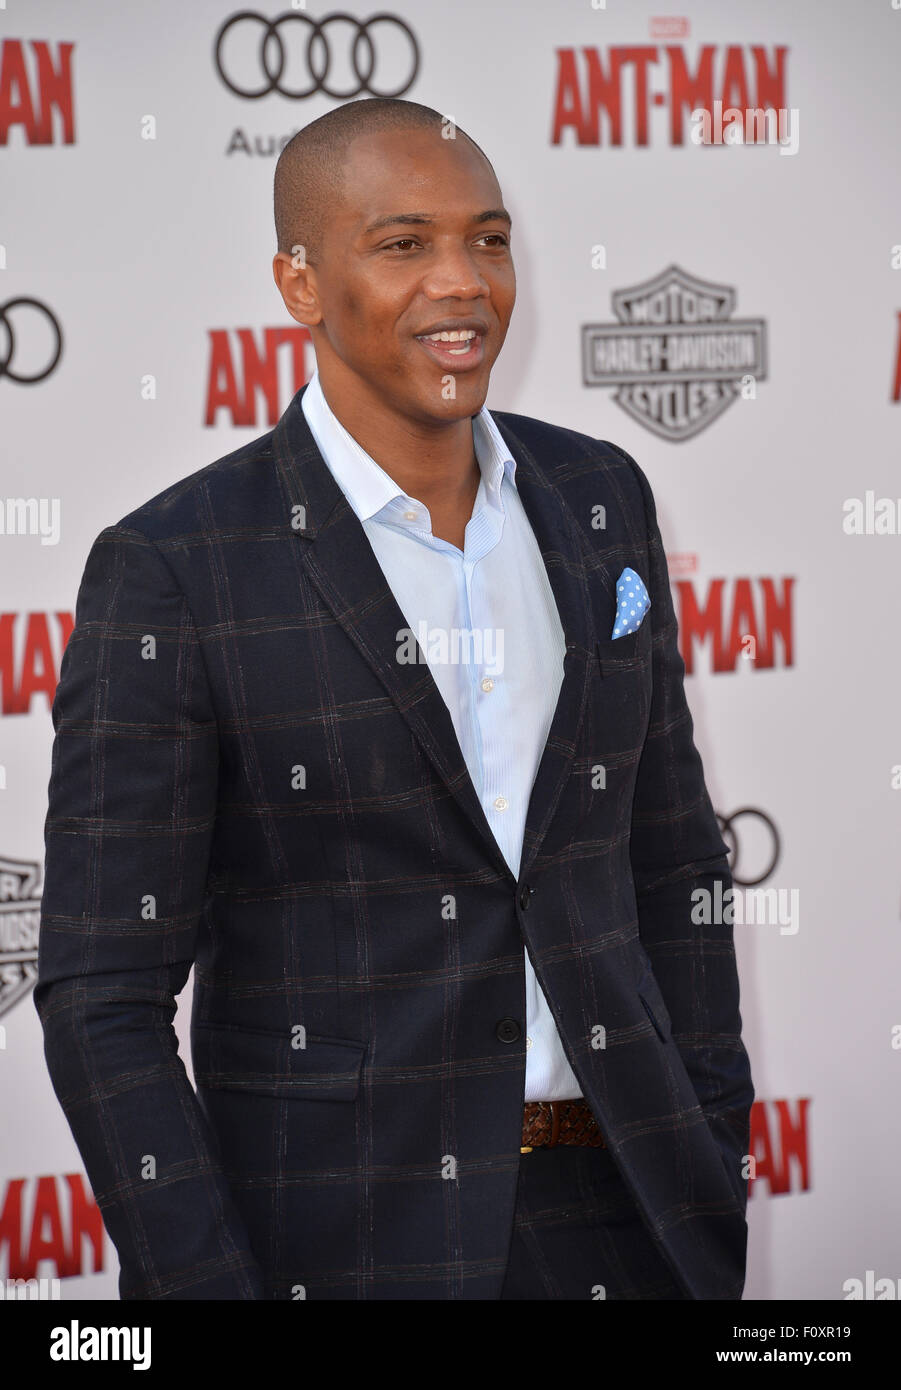 LOS ANGELES, CA - JUNE 29, 2015: Actor J. August Richards at the world premiere of 'Ant-Man' at the Dolby Theatre, Hollywood. Stock Photo